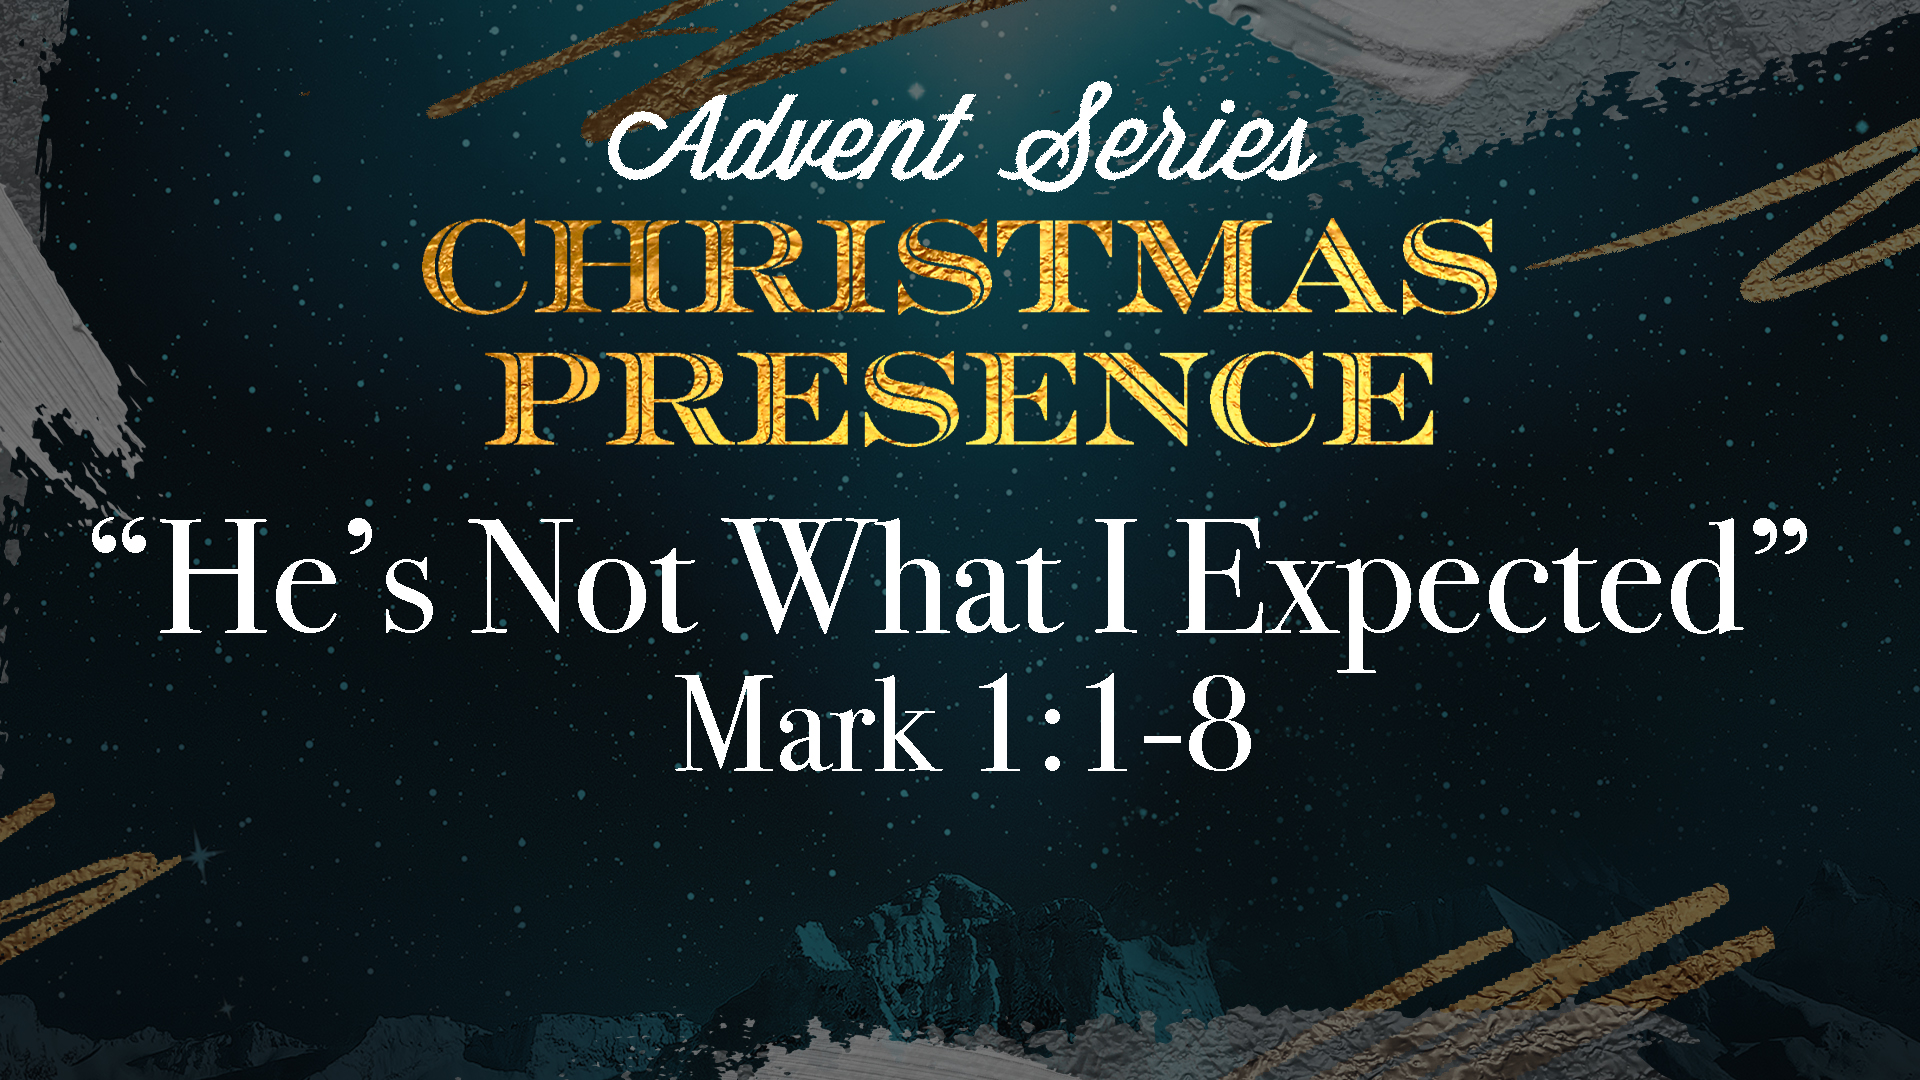 Advent Series: Christmas Presence Part 2 “He’s Not What I Expected” (Traditional)